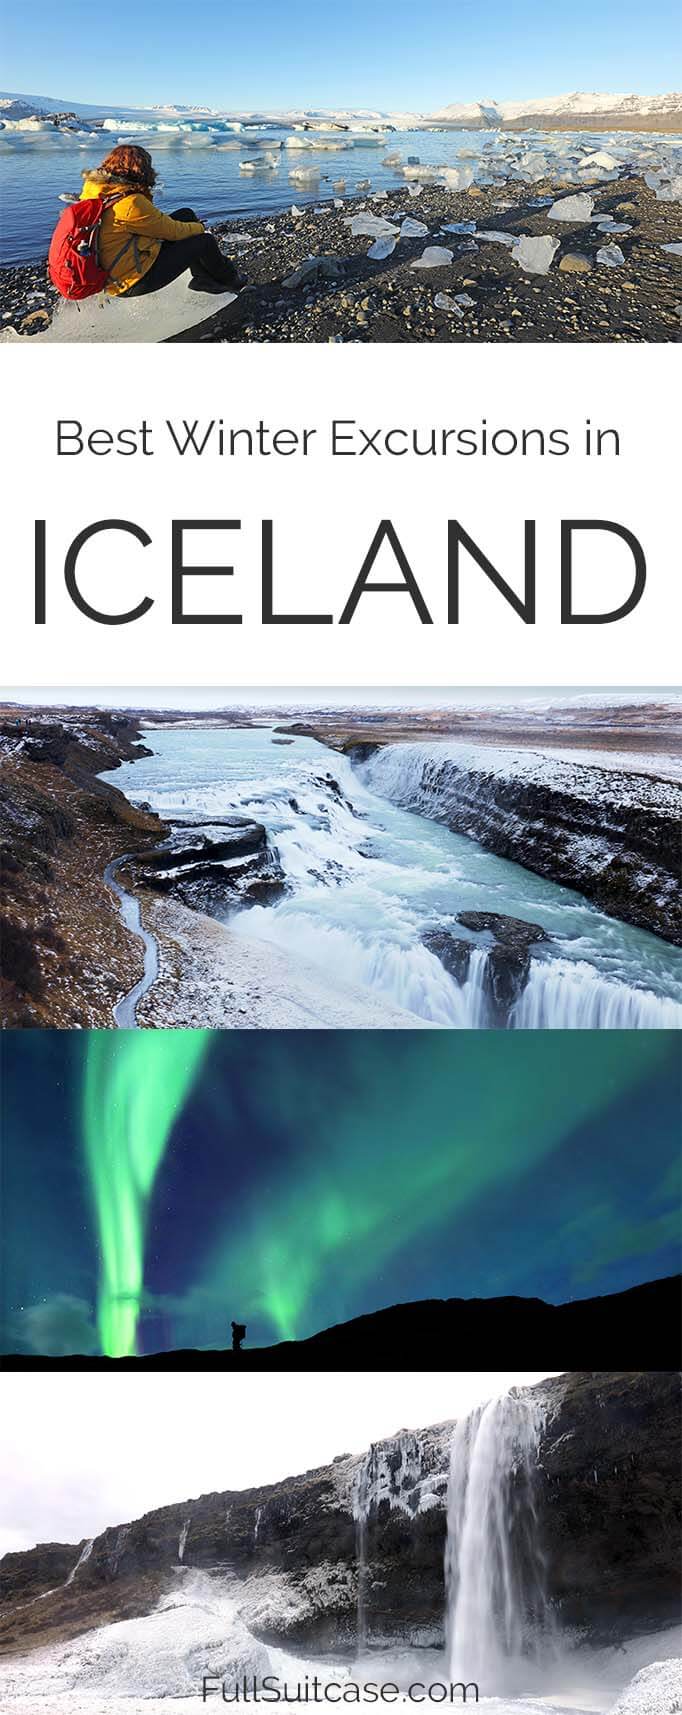 Best Iceland winter tours, excursions and day trips from Reykjavik #Iceland #winter #trip